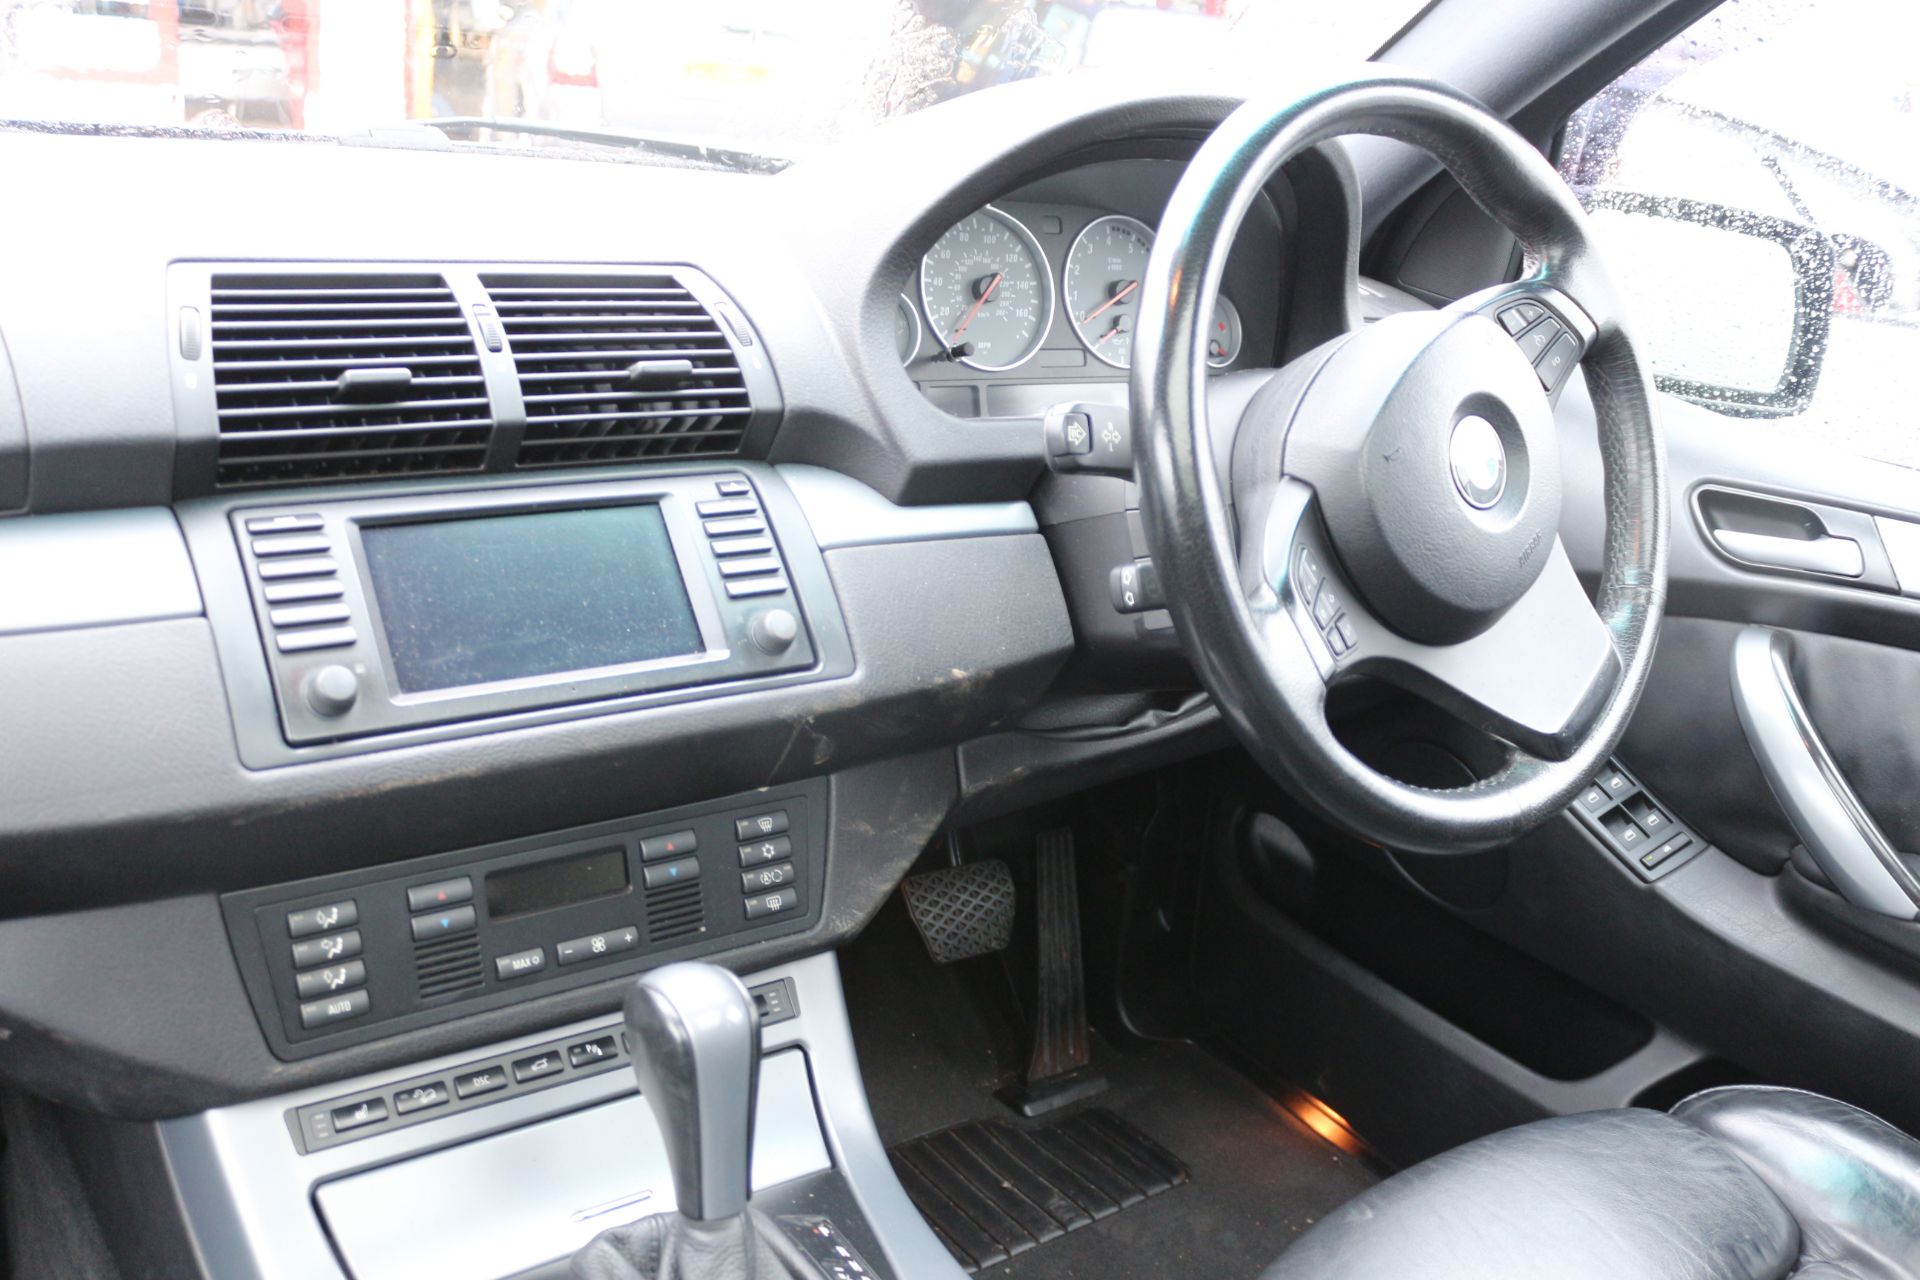 BMW X5, X5 IS FACE LIFT MODEL, HN54 FXZ, 4-8 IS, PETROL, AUTOMATIC, 2004, 5 DOOR, CURRENT RECORDED - Image 7 of 15